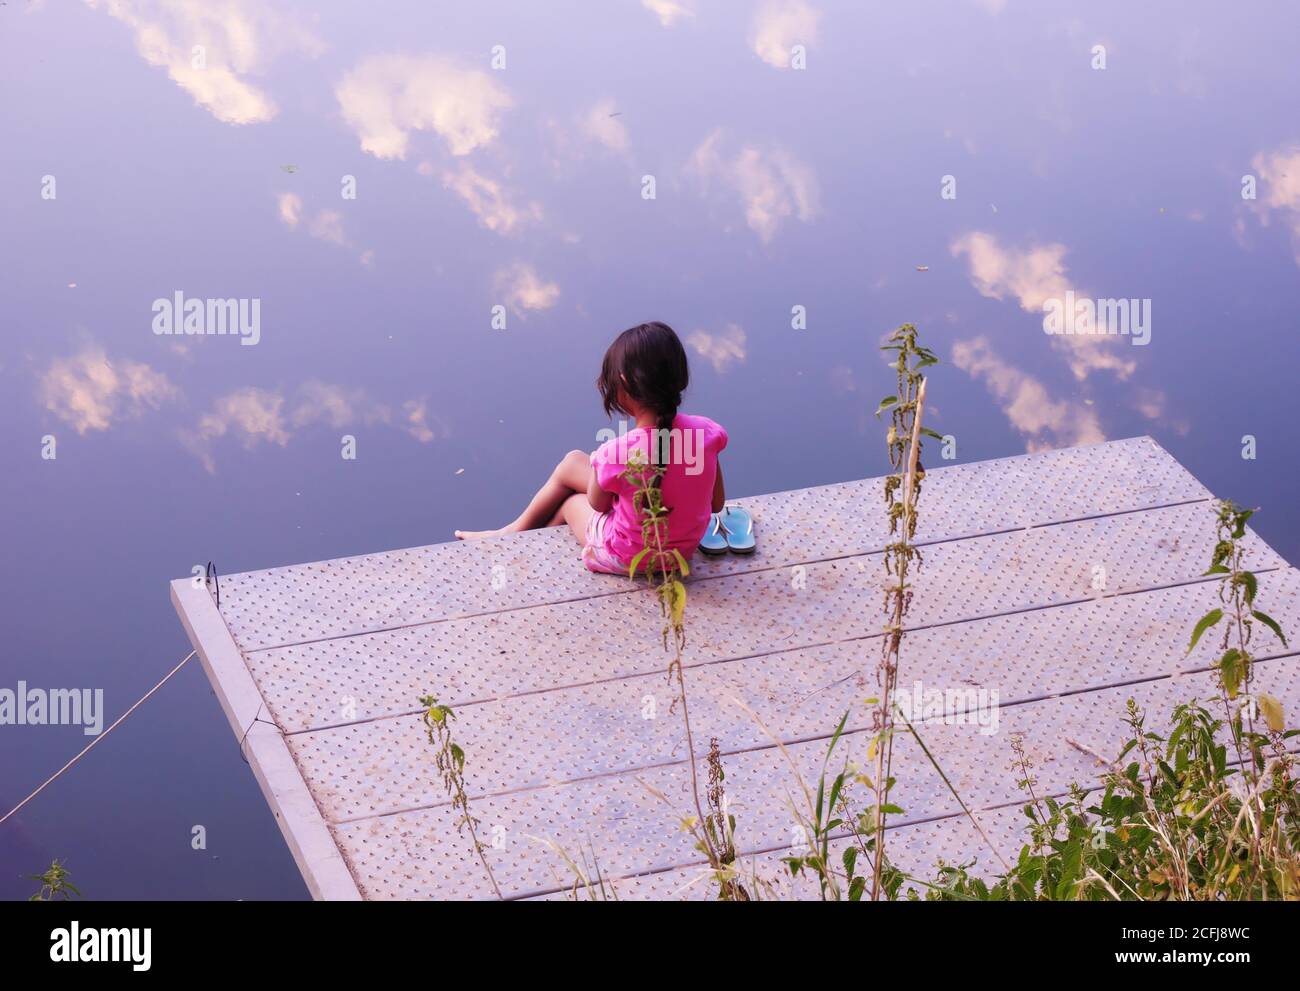 Little girl seen from behind, sitting on a pontoon and contemplating the clouds that reflect in the river during a sunset Stock Photo